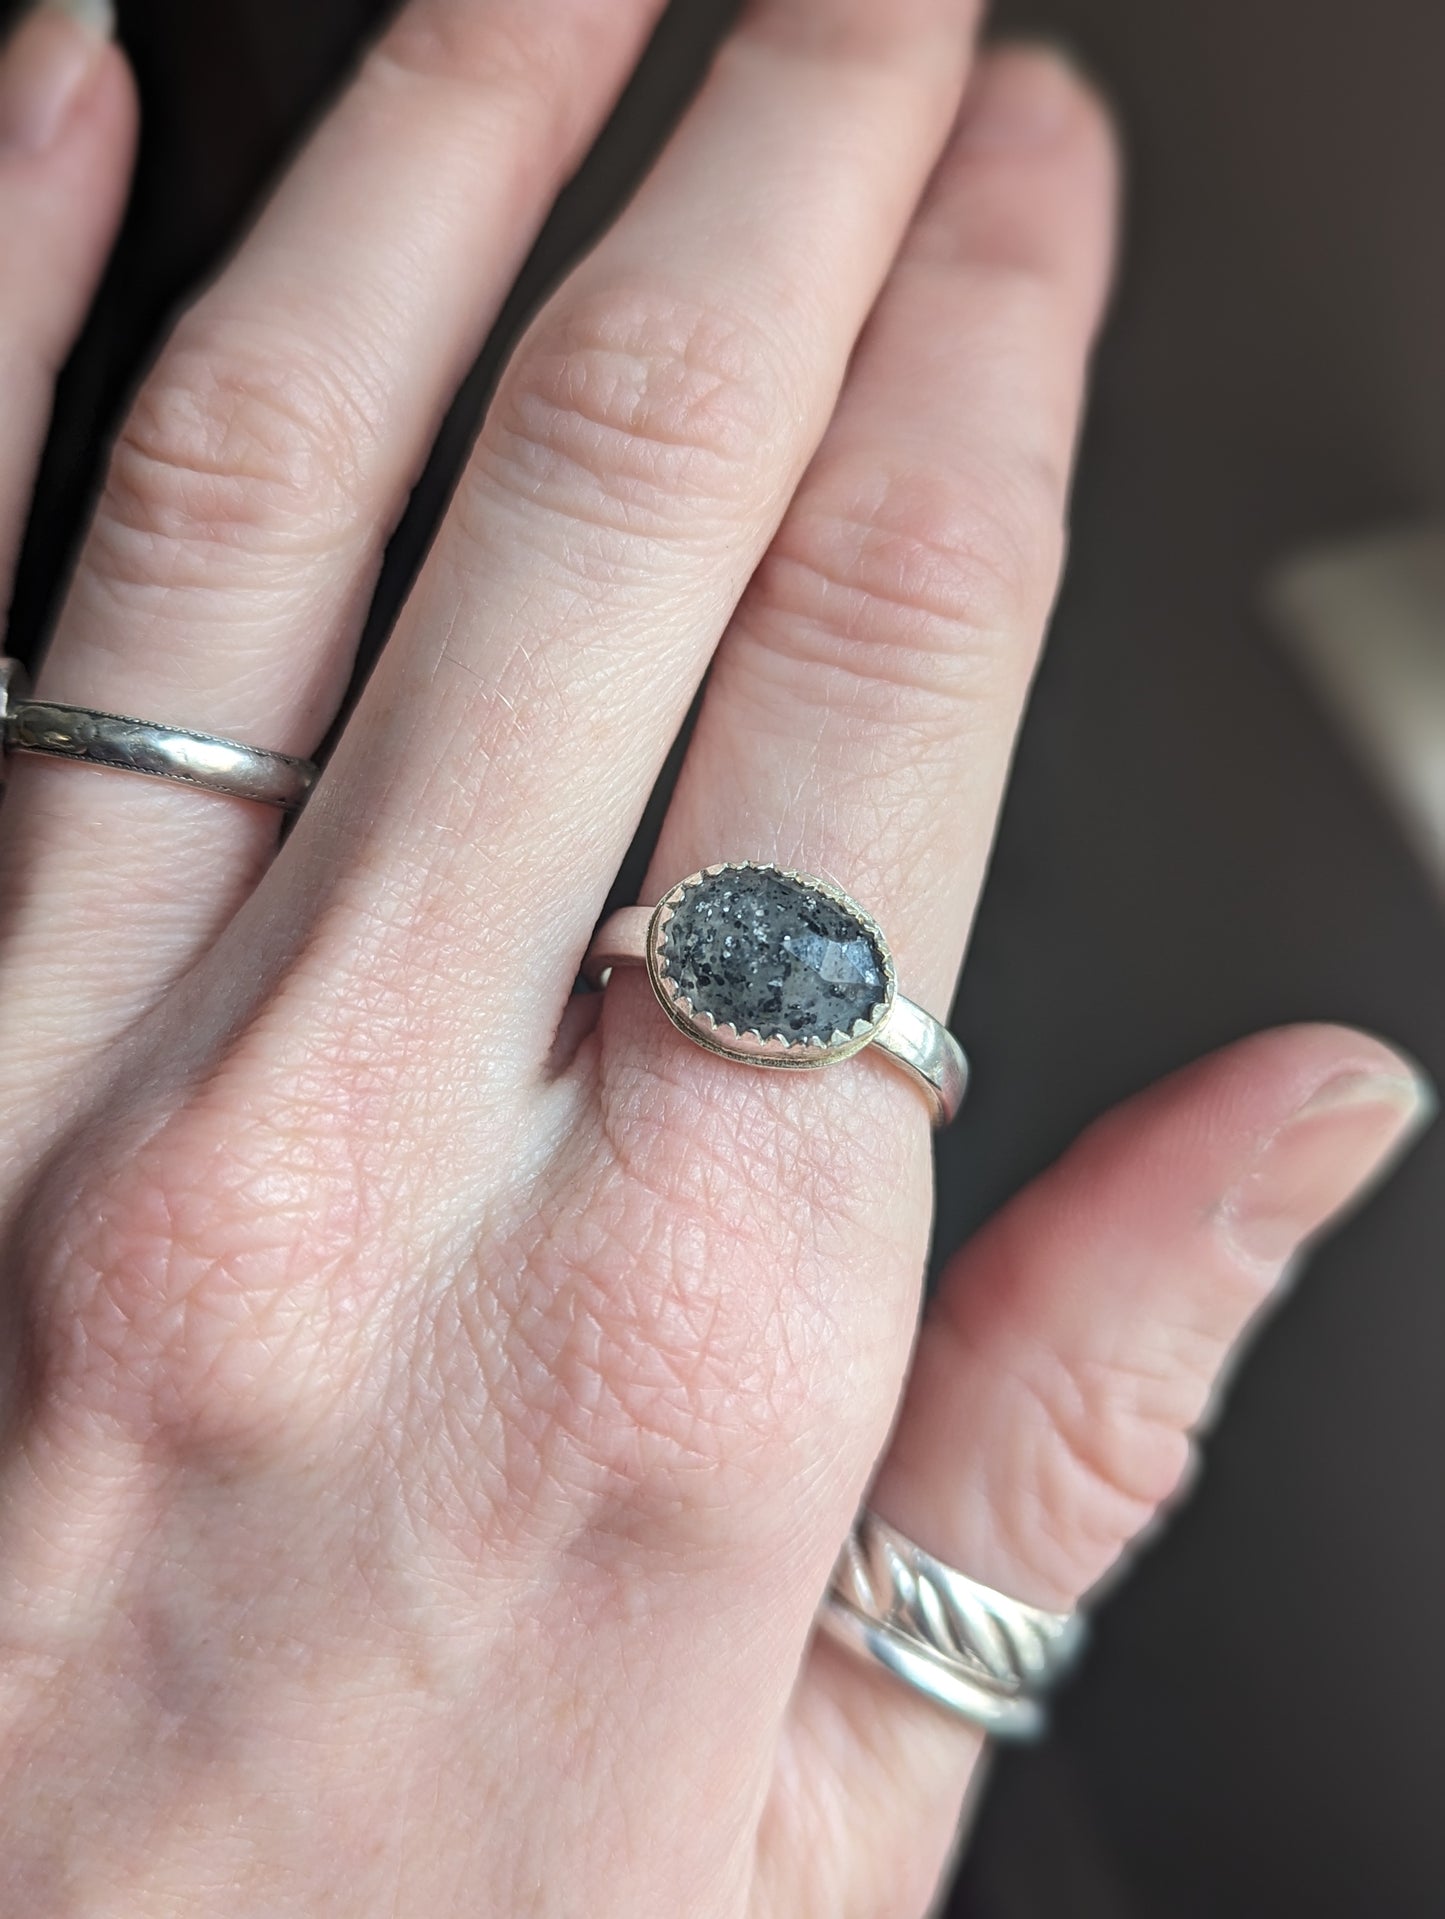 Black Sunstone Sterling Ring (various sizes available)